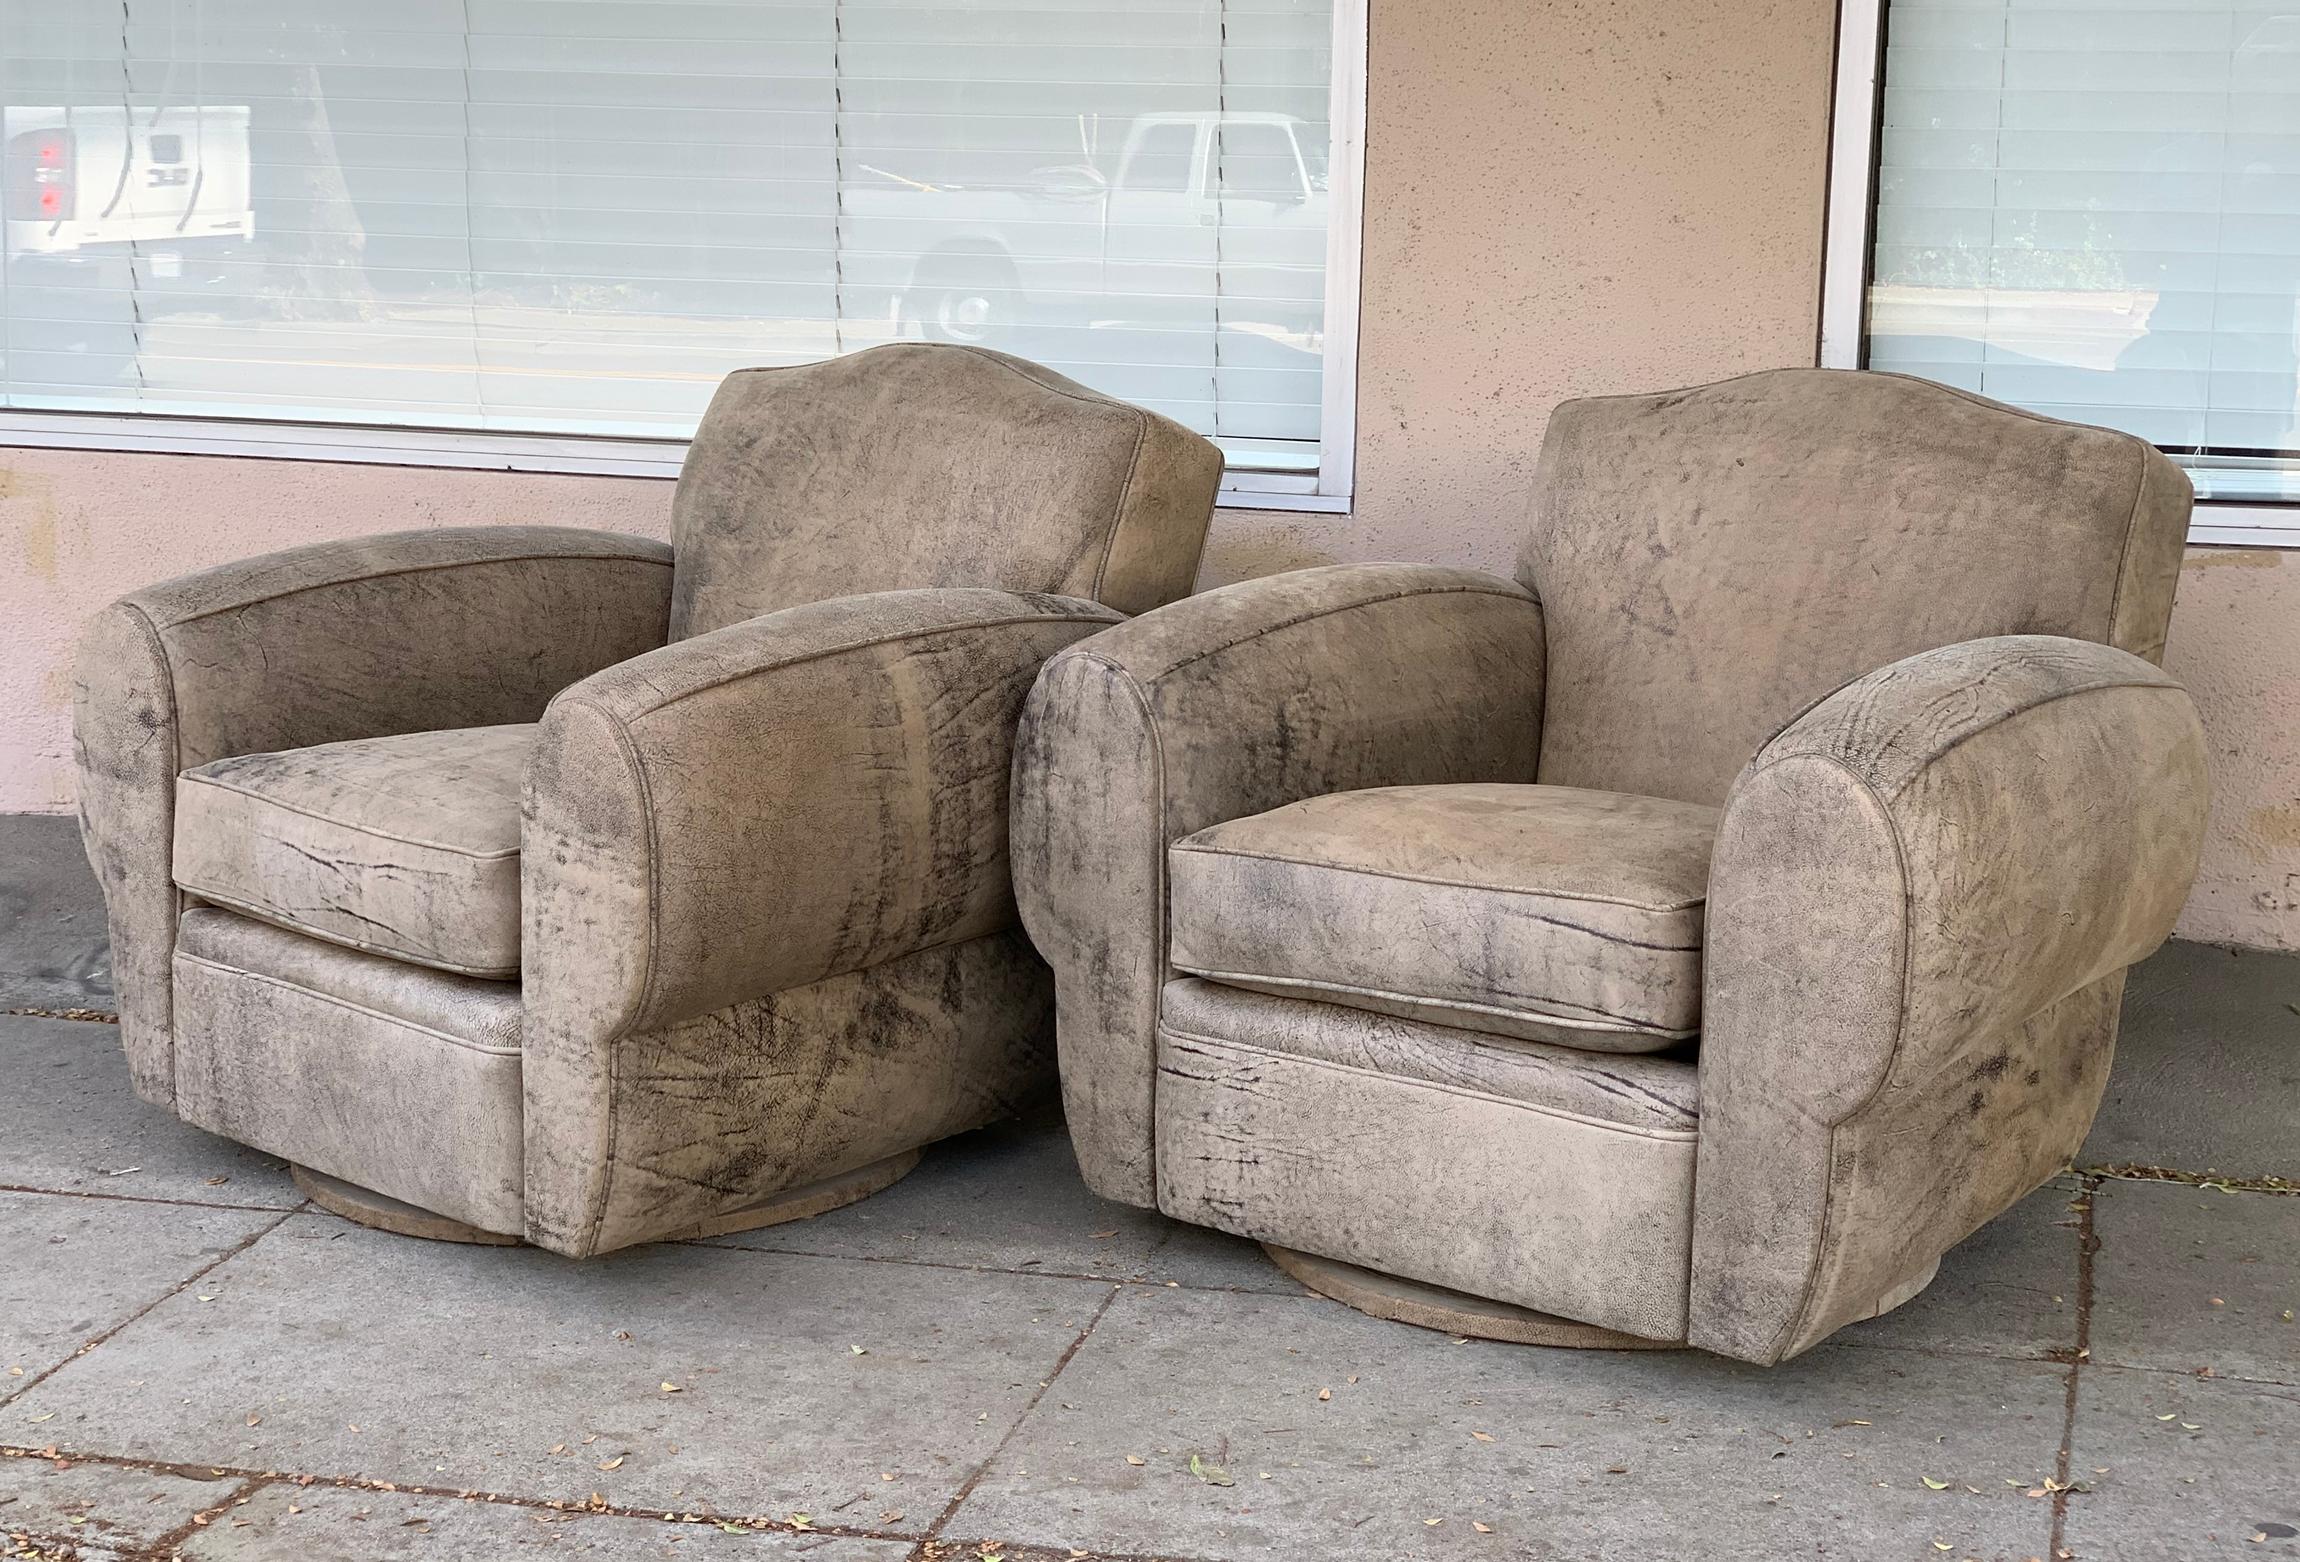 Beautiful pair of chairs designed and manufactured in Los Angeles California, upholstered in elephant print leather, the chairs have a swivel based and can swivel 360 degrees, they are newly upholstered and are in excellent condition.
Measures: 31”